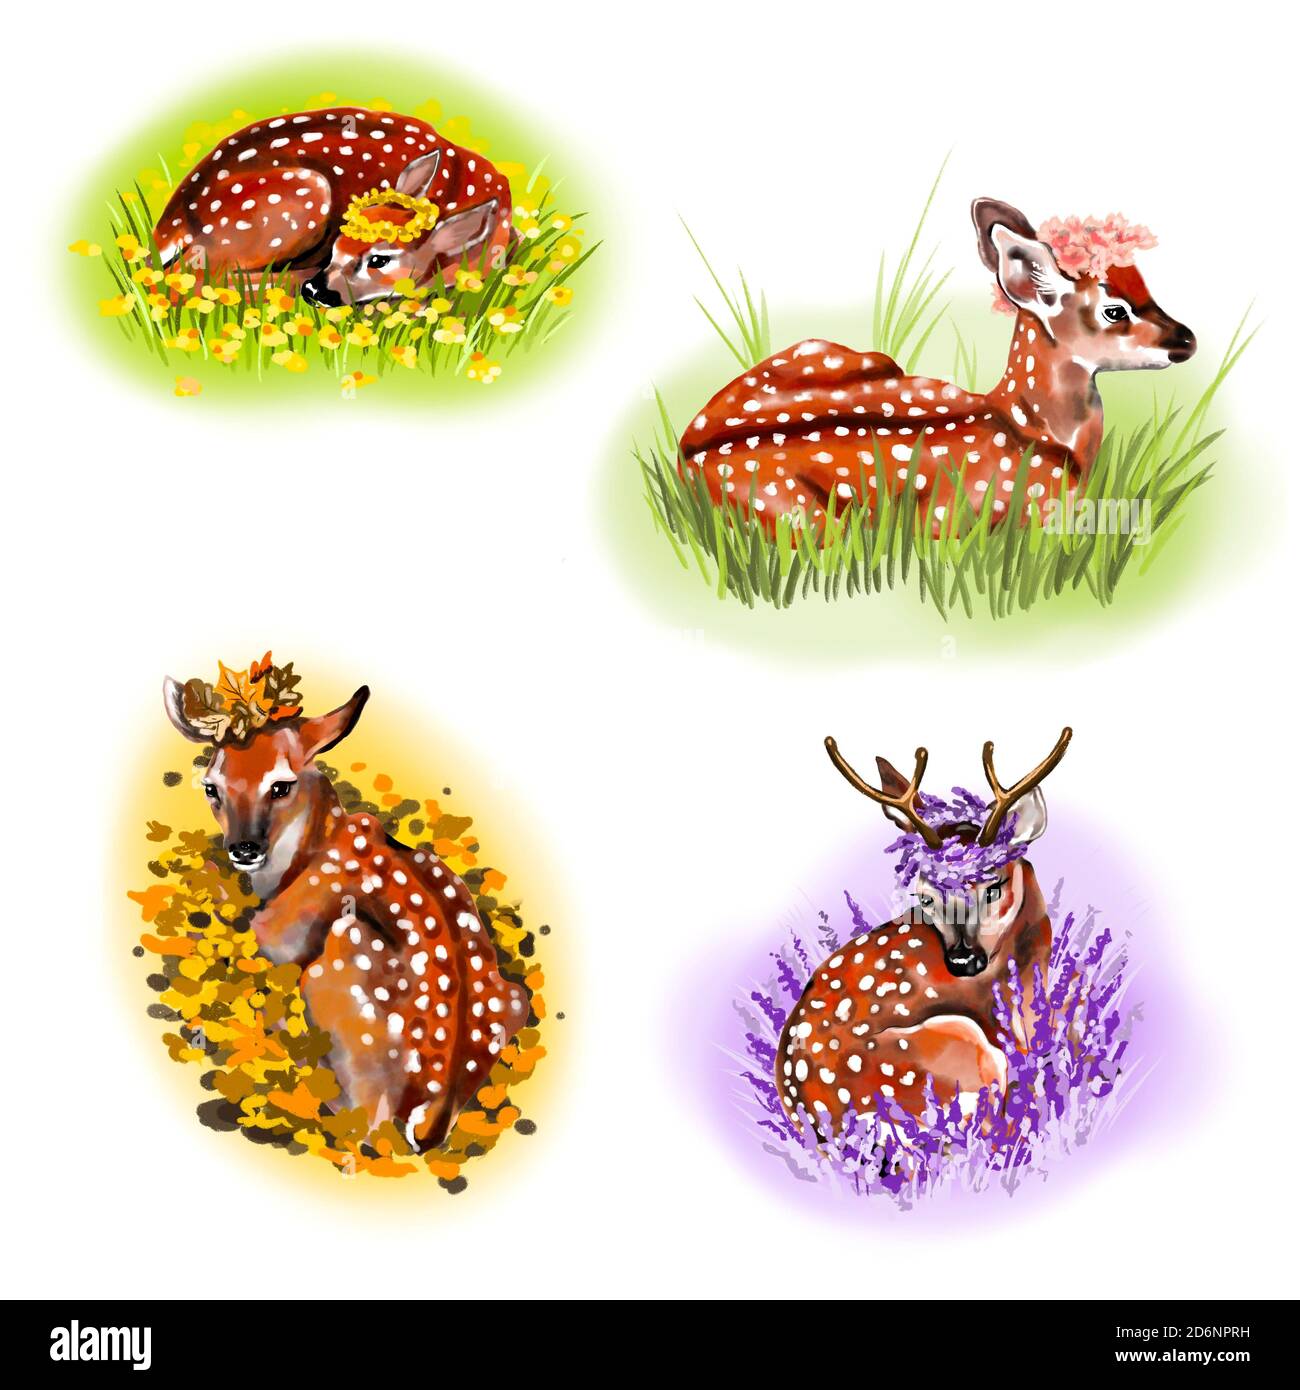 Isolated deer drawings in four seasons. On a white background: four animals in autumn, winter, summer and spring environment. Decorated w/ flowers and Stock Photo